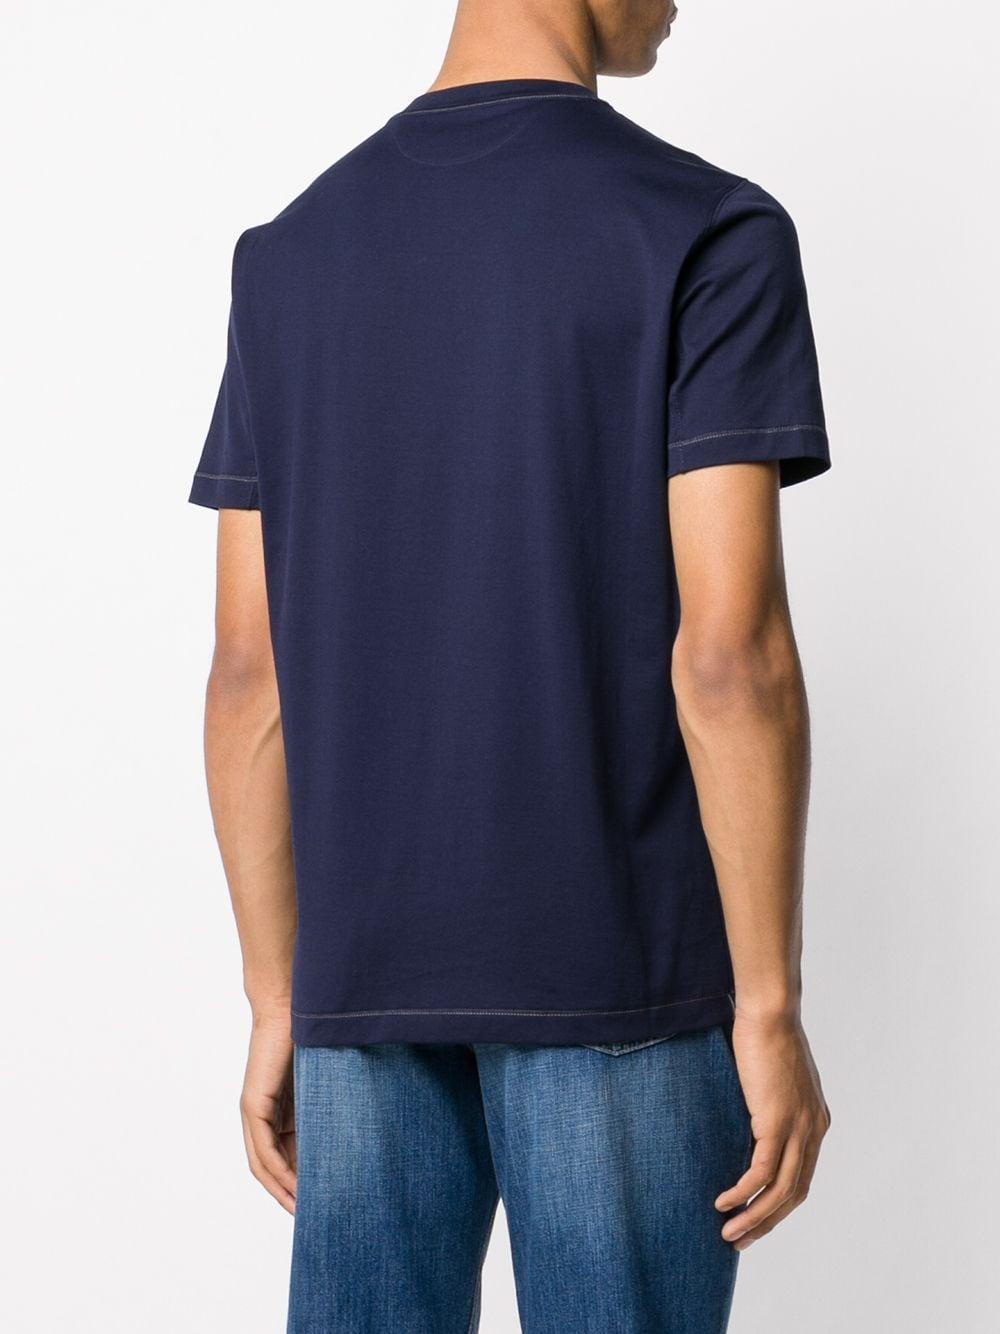 Brunello Cucinelli Cotton Embroidered Logo T-shirt in Blue for Men - Lyst